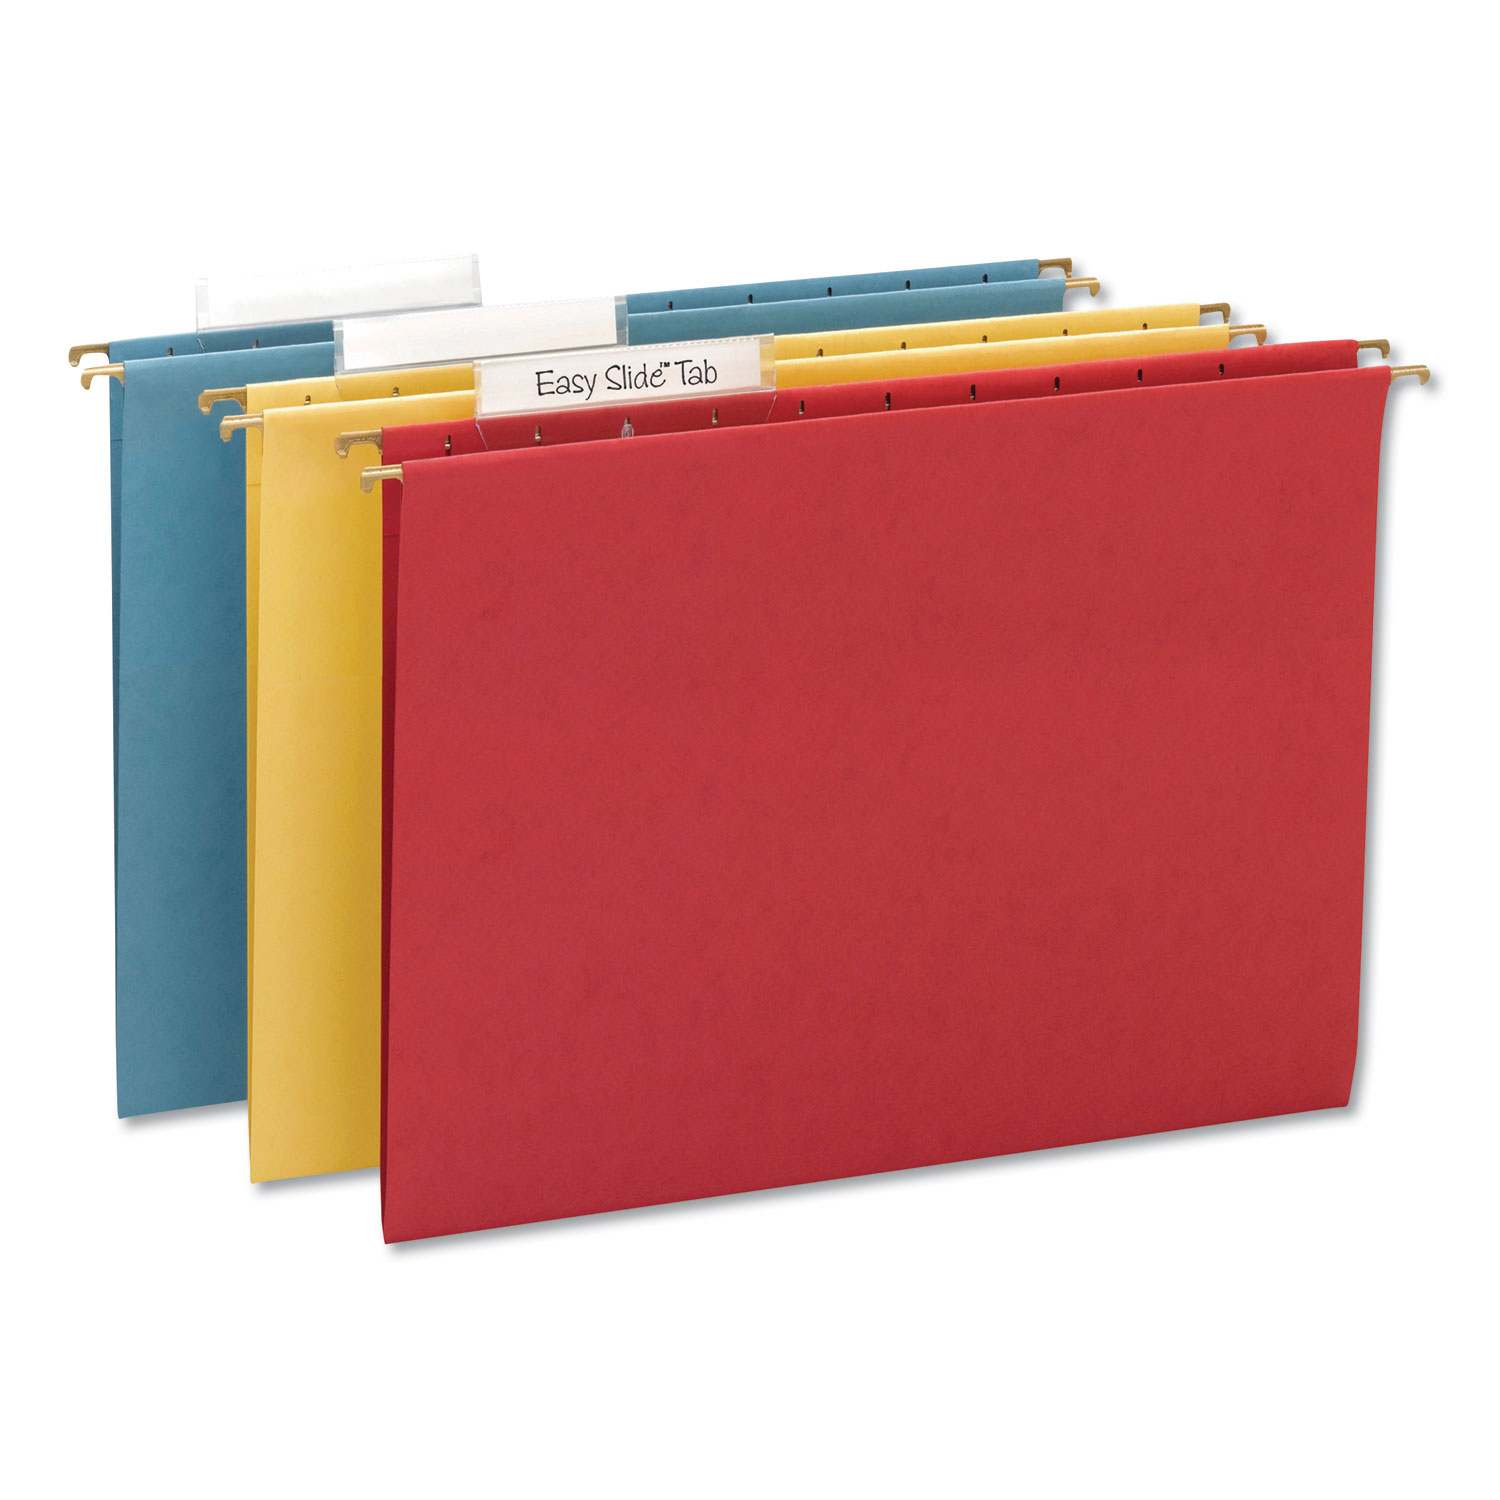  Smead 64040 TUFF Hanging Folders with Easy Slide Tab, Letter Size, 1/3-Cut Tab, Assorted, 15/Box (SMD64040) 